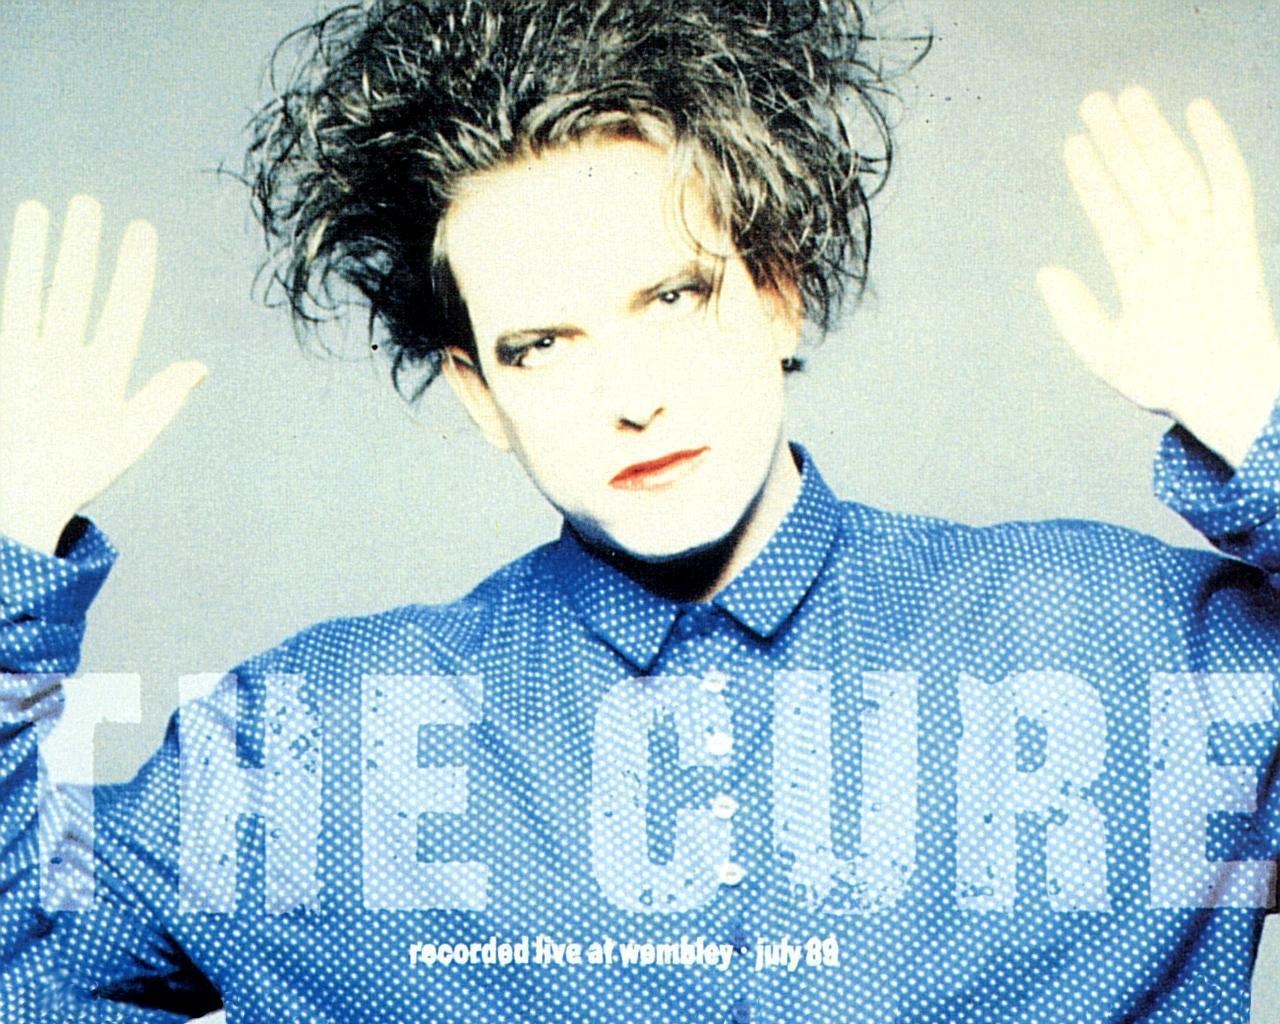 Wallpaper The Cure 1024x768 #the cure